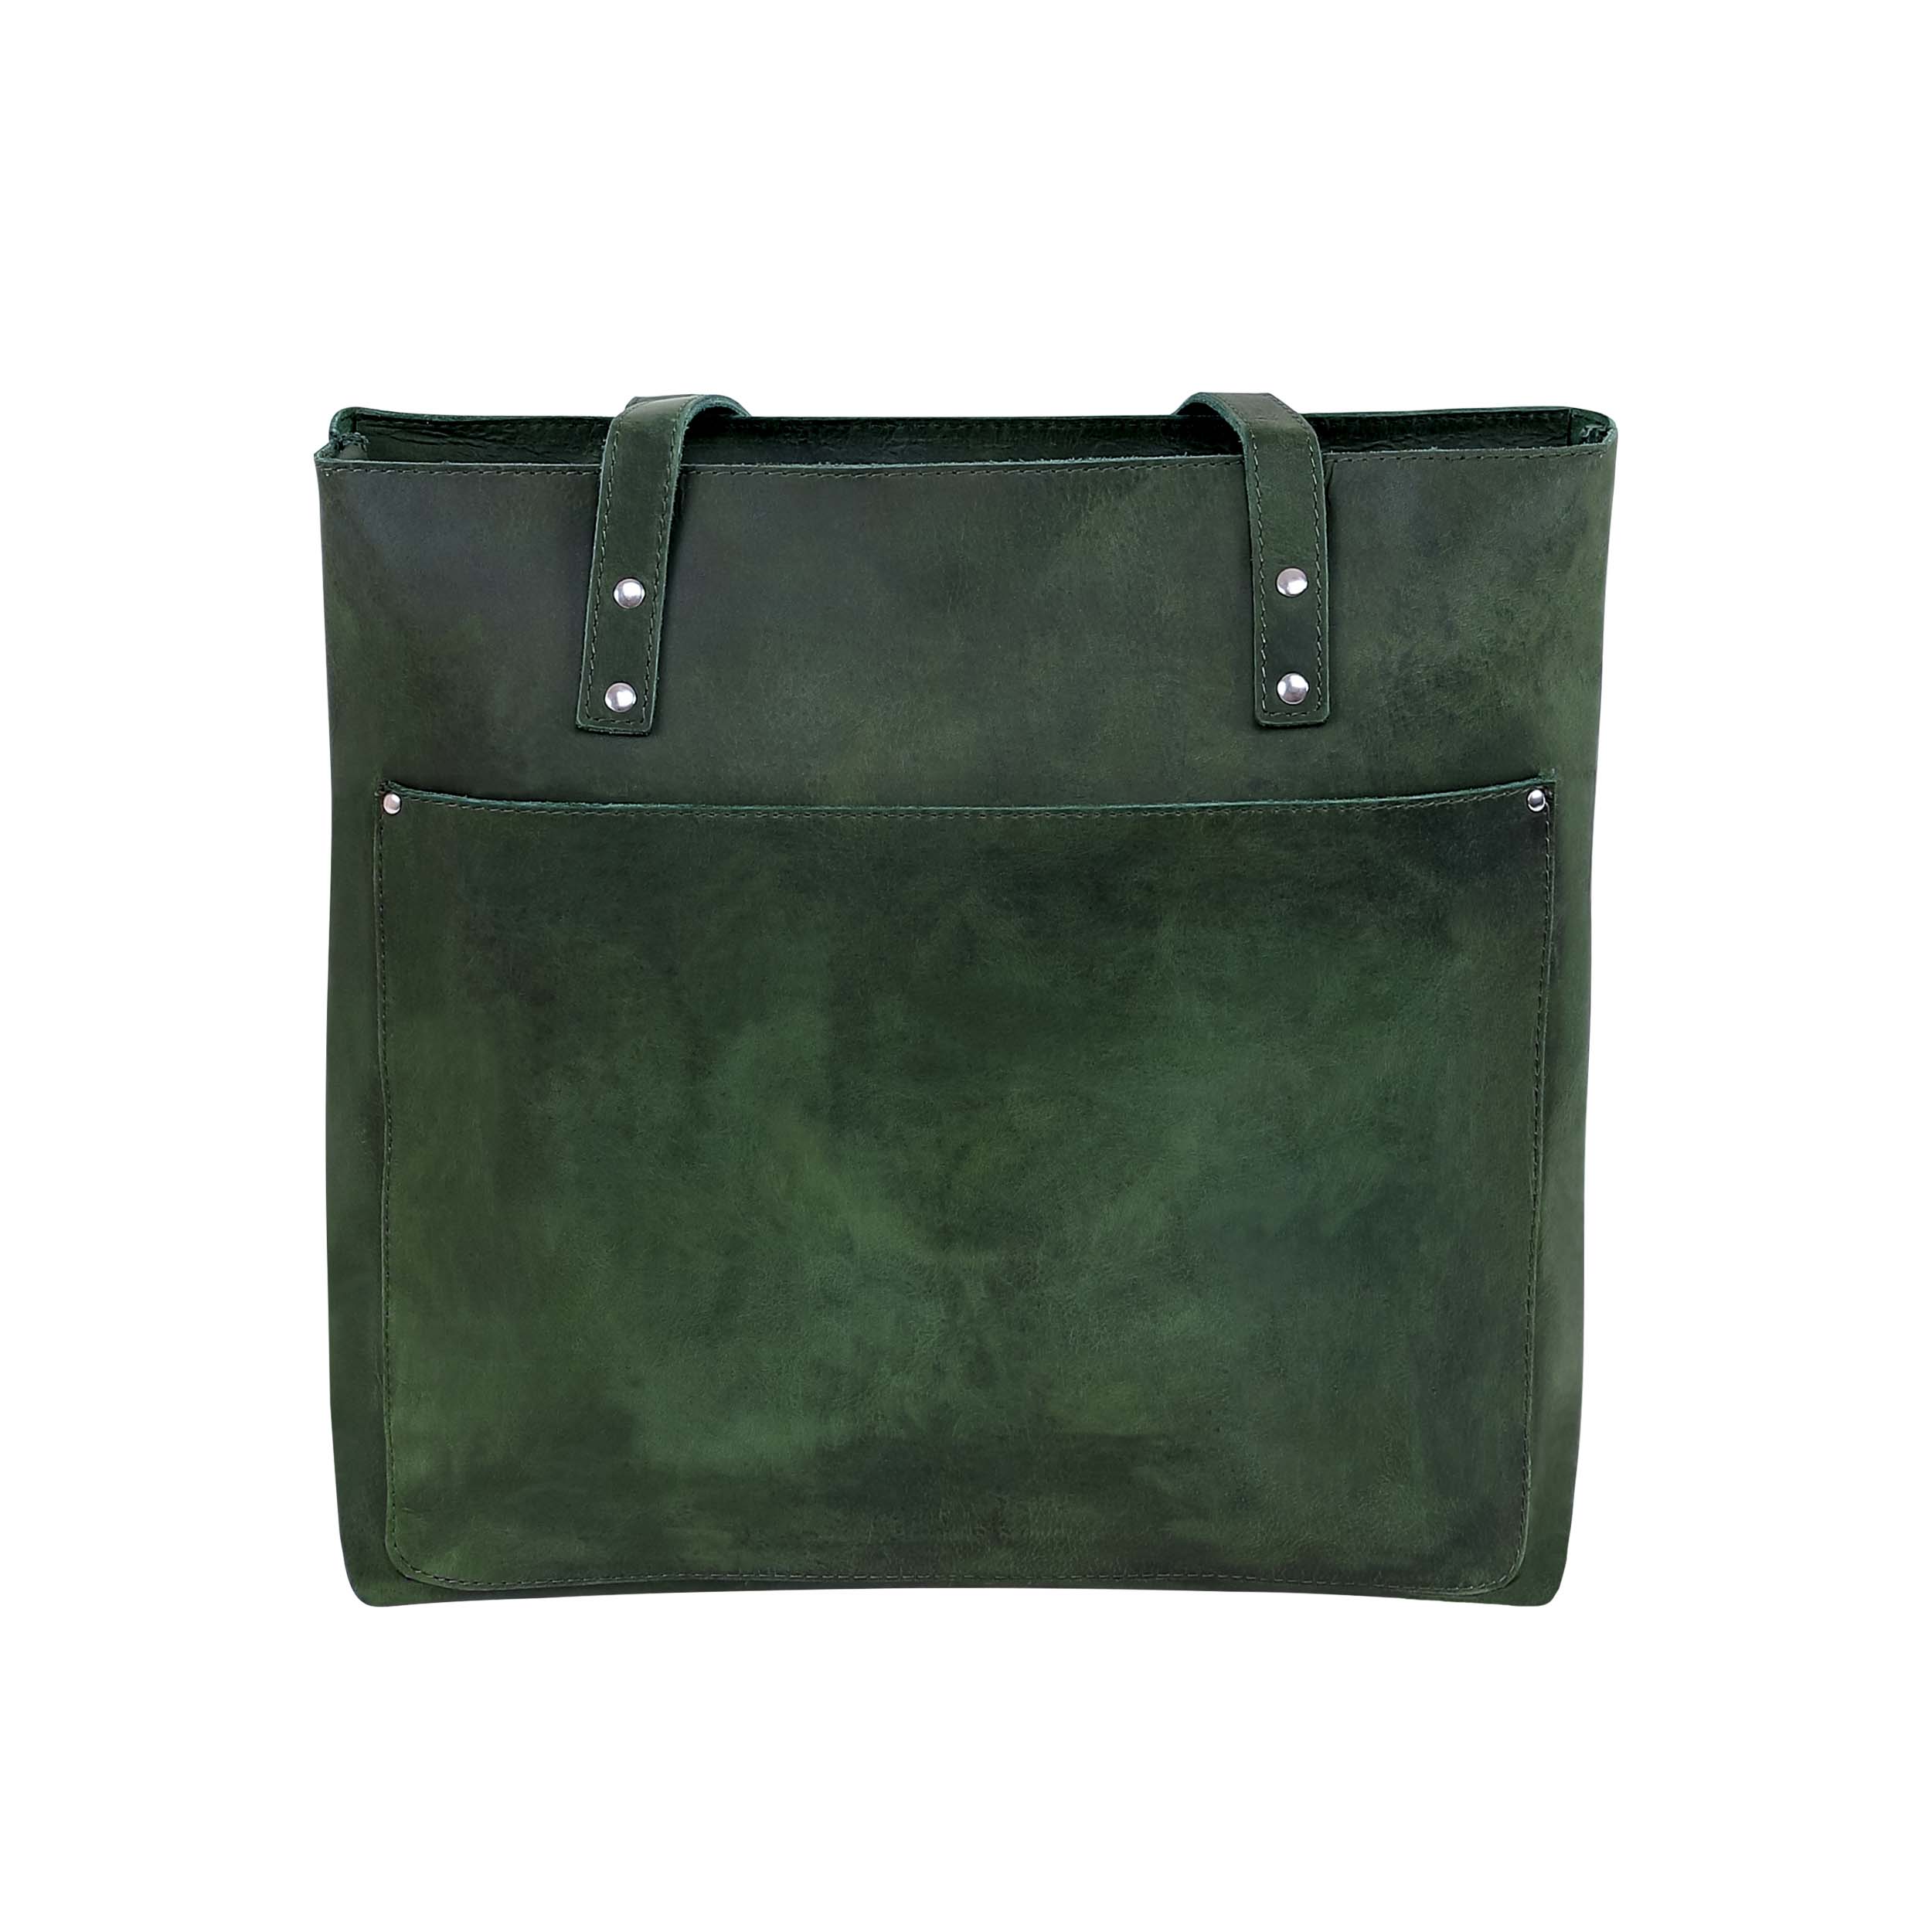 Leather Tote Bag 9916 - Green